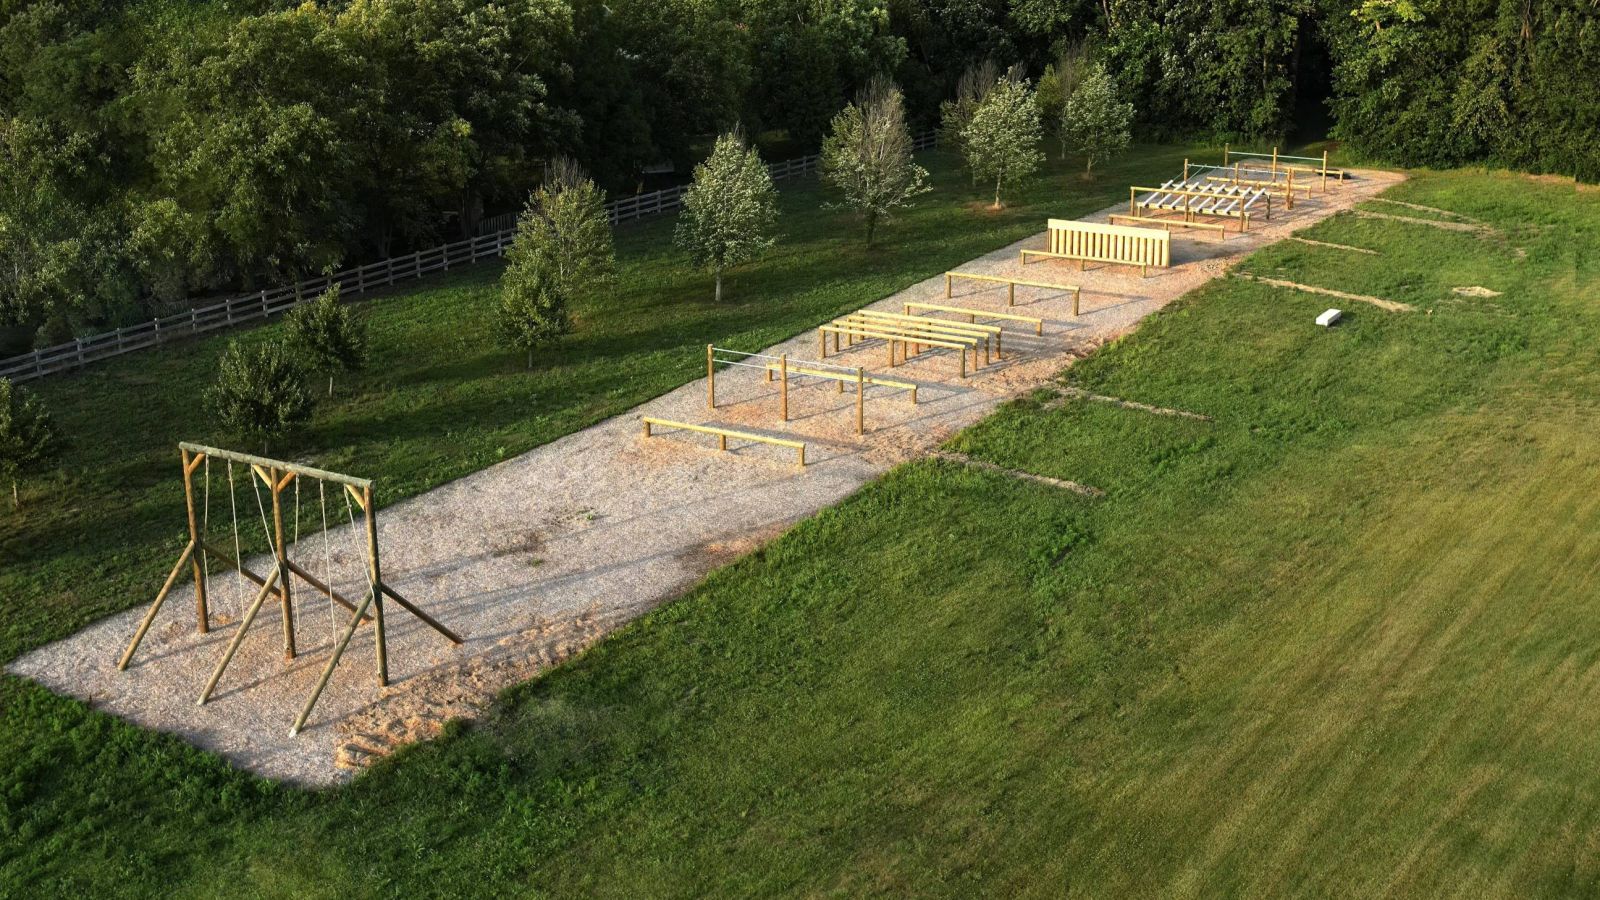 The ROTC program's obstacle course, not yet dedicated, pictured in the weeks preceding the ceremony. (Drone shot provided by the Purdue For Life Foundation)